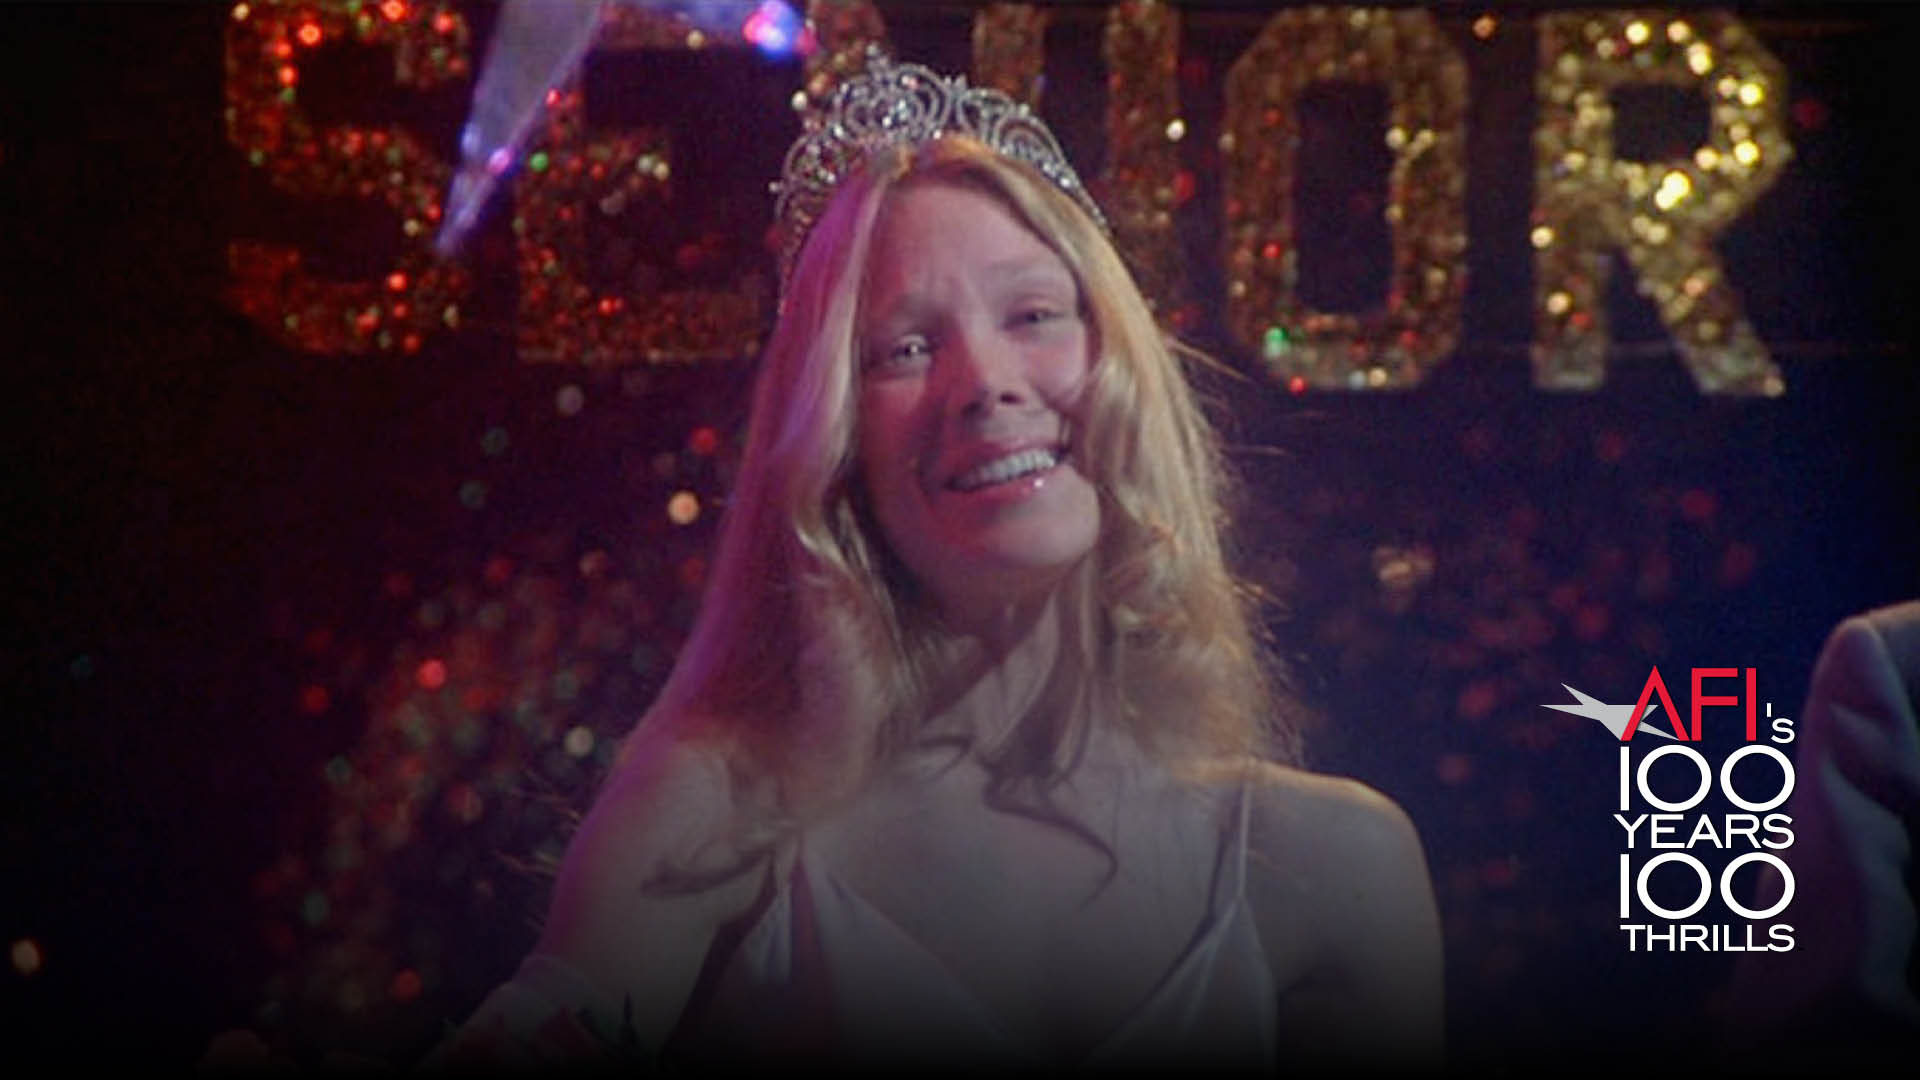 Image from the film CARRIE